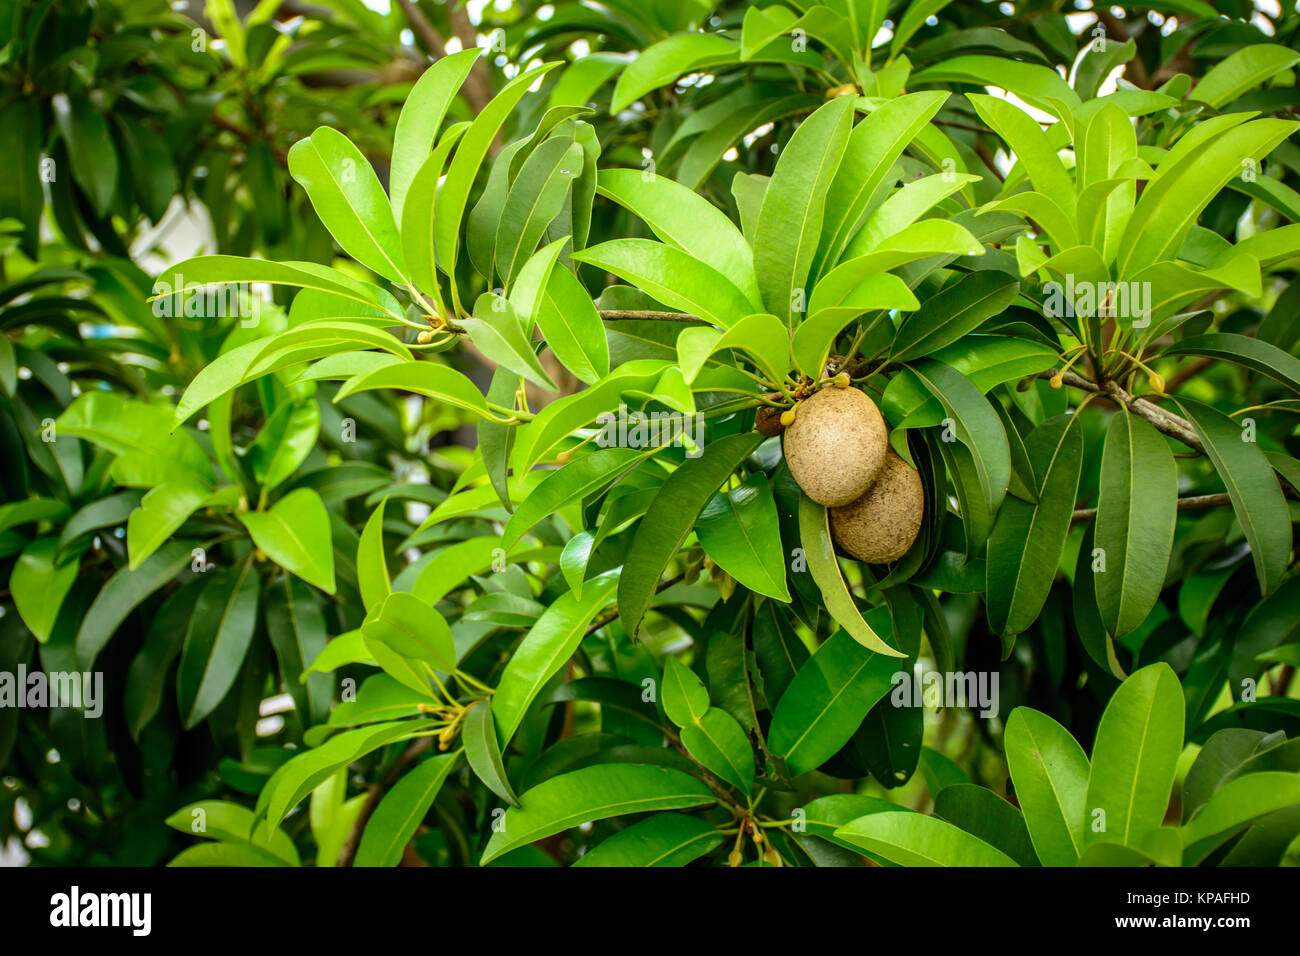 sapodilla plant with green leaf and fruits Stock Photo